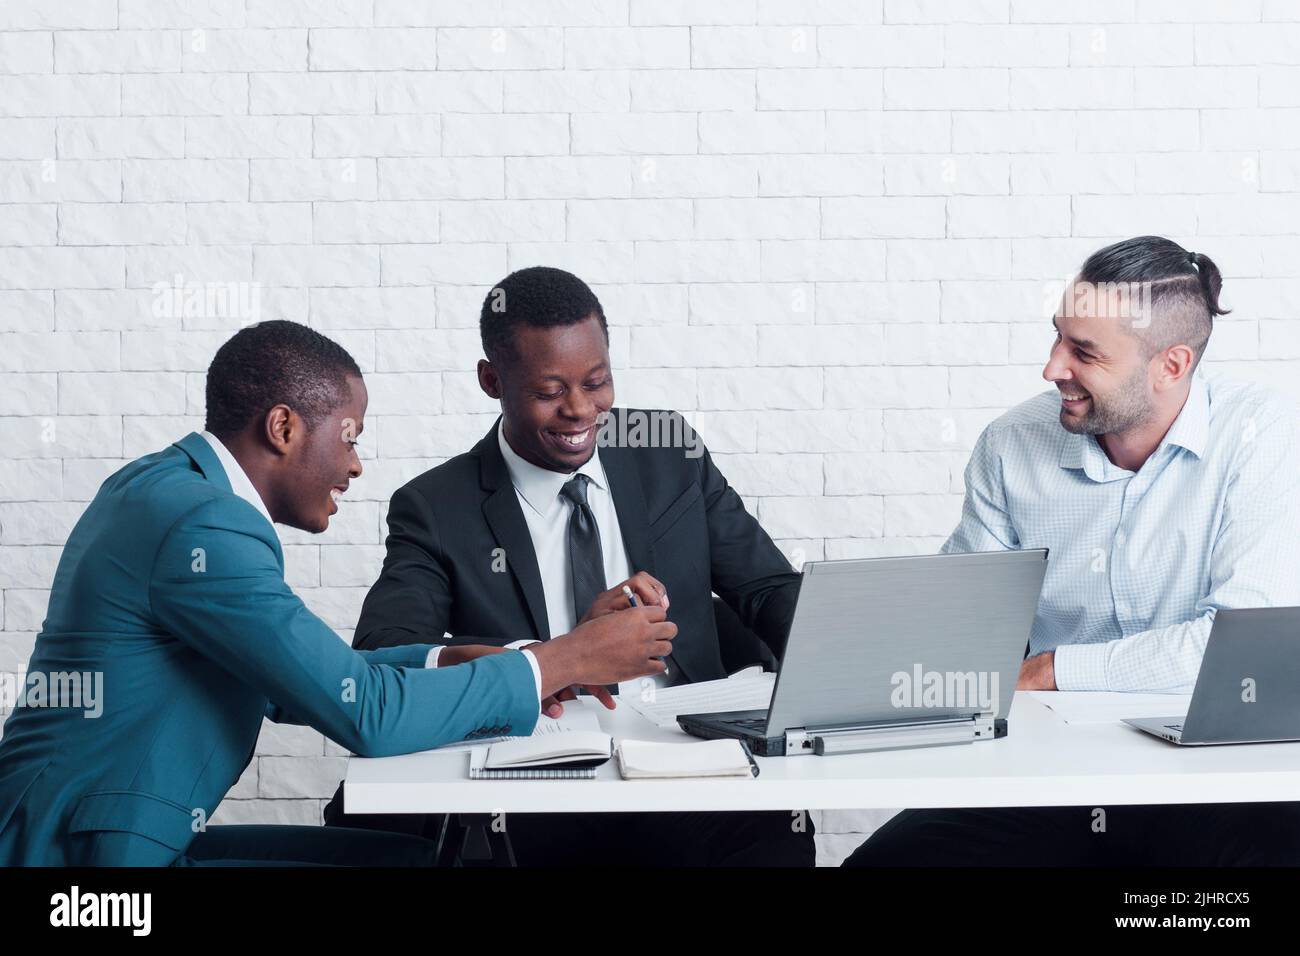 Lazy workers chatting in office. Bad discipline. Stock Photo